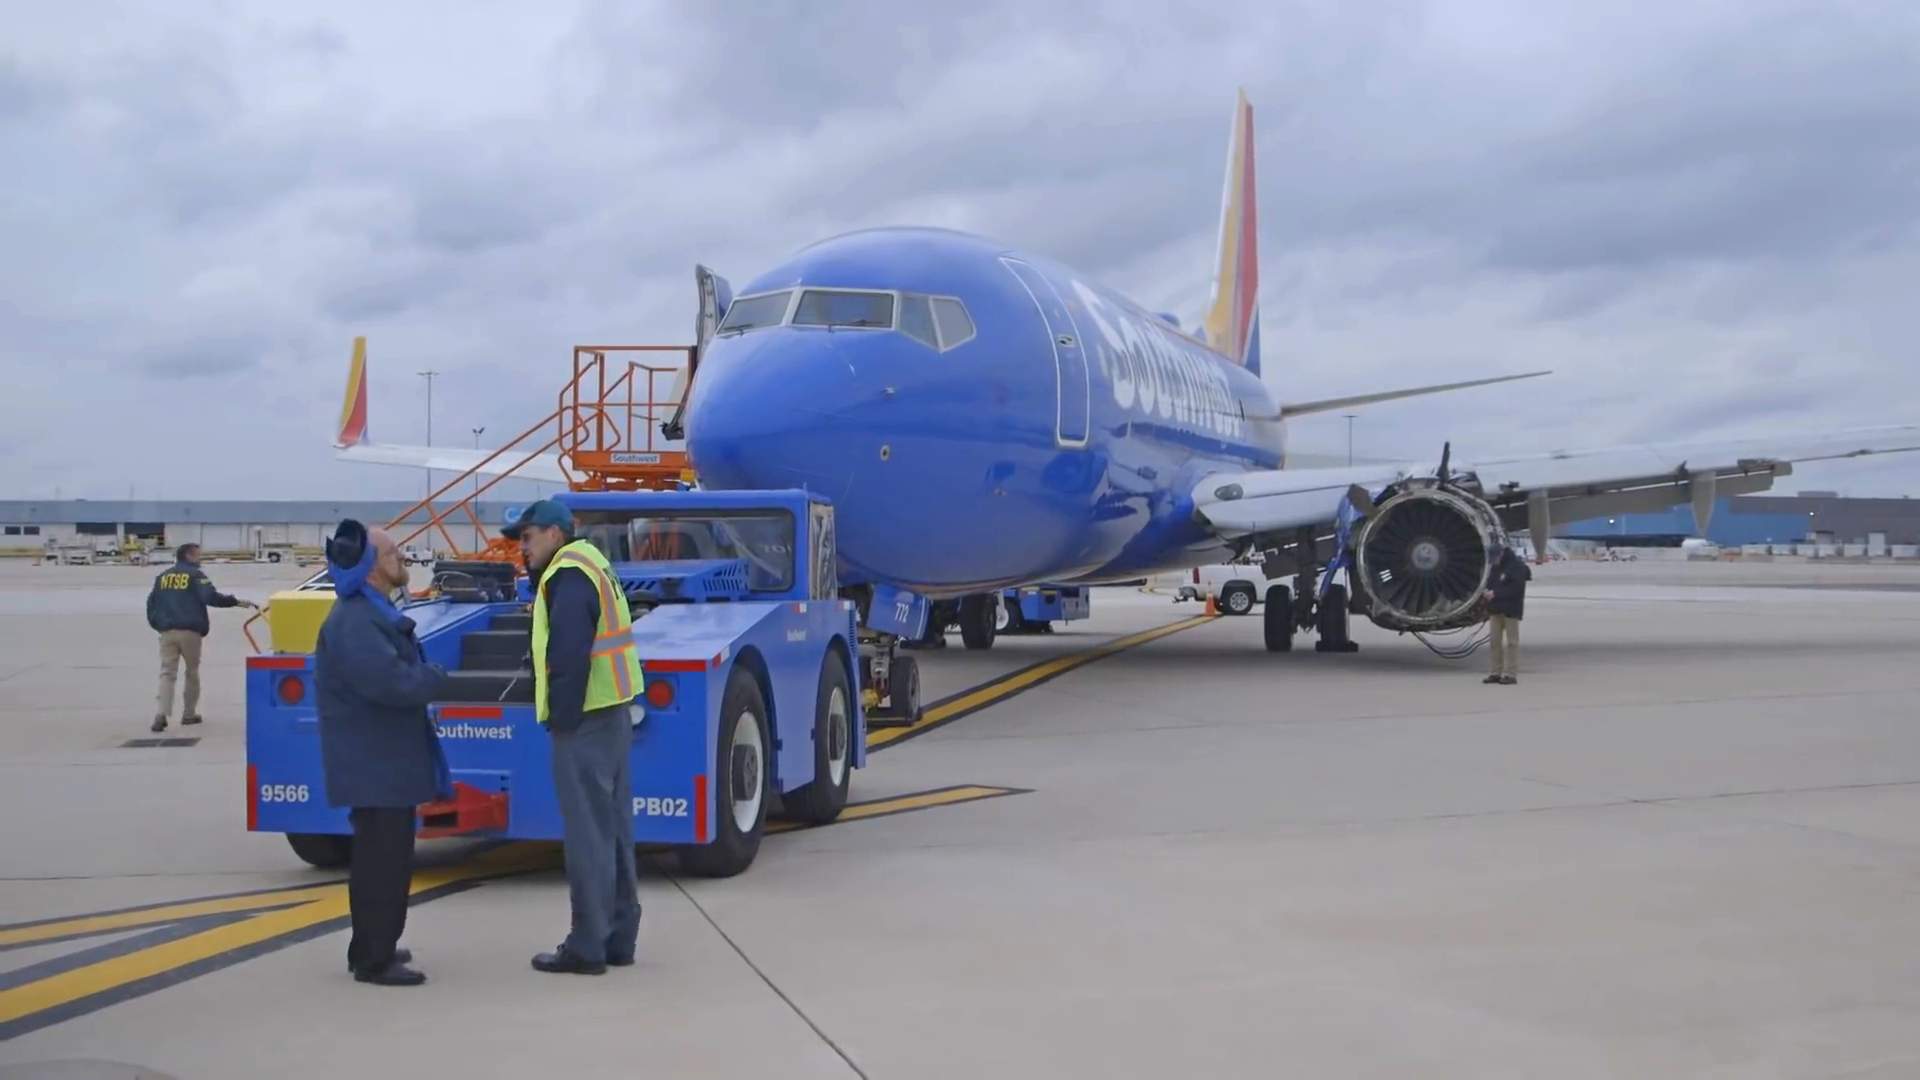 Southwest 1380 Accident Prompts FAA Airworthiness Directives